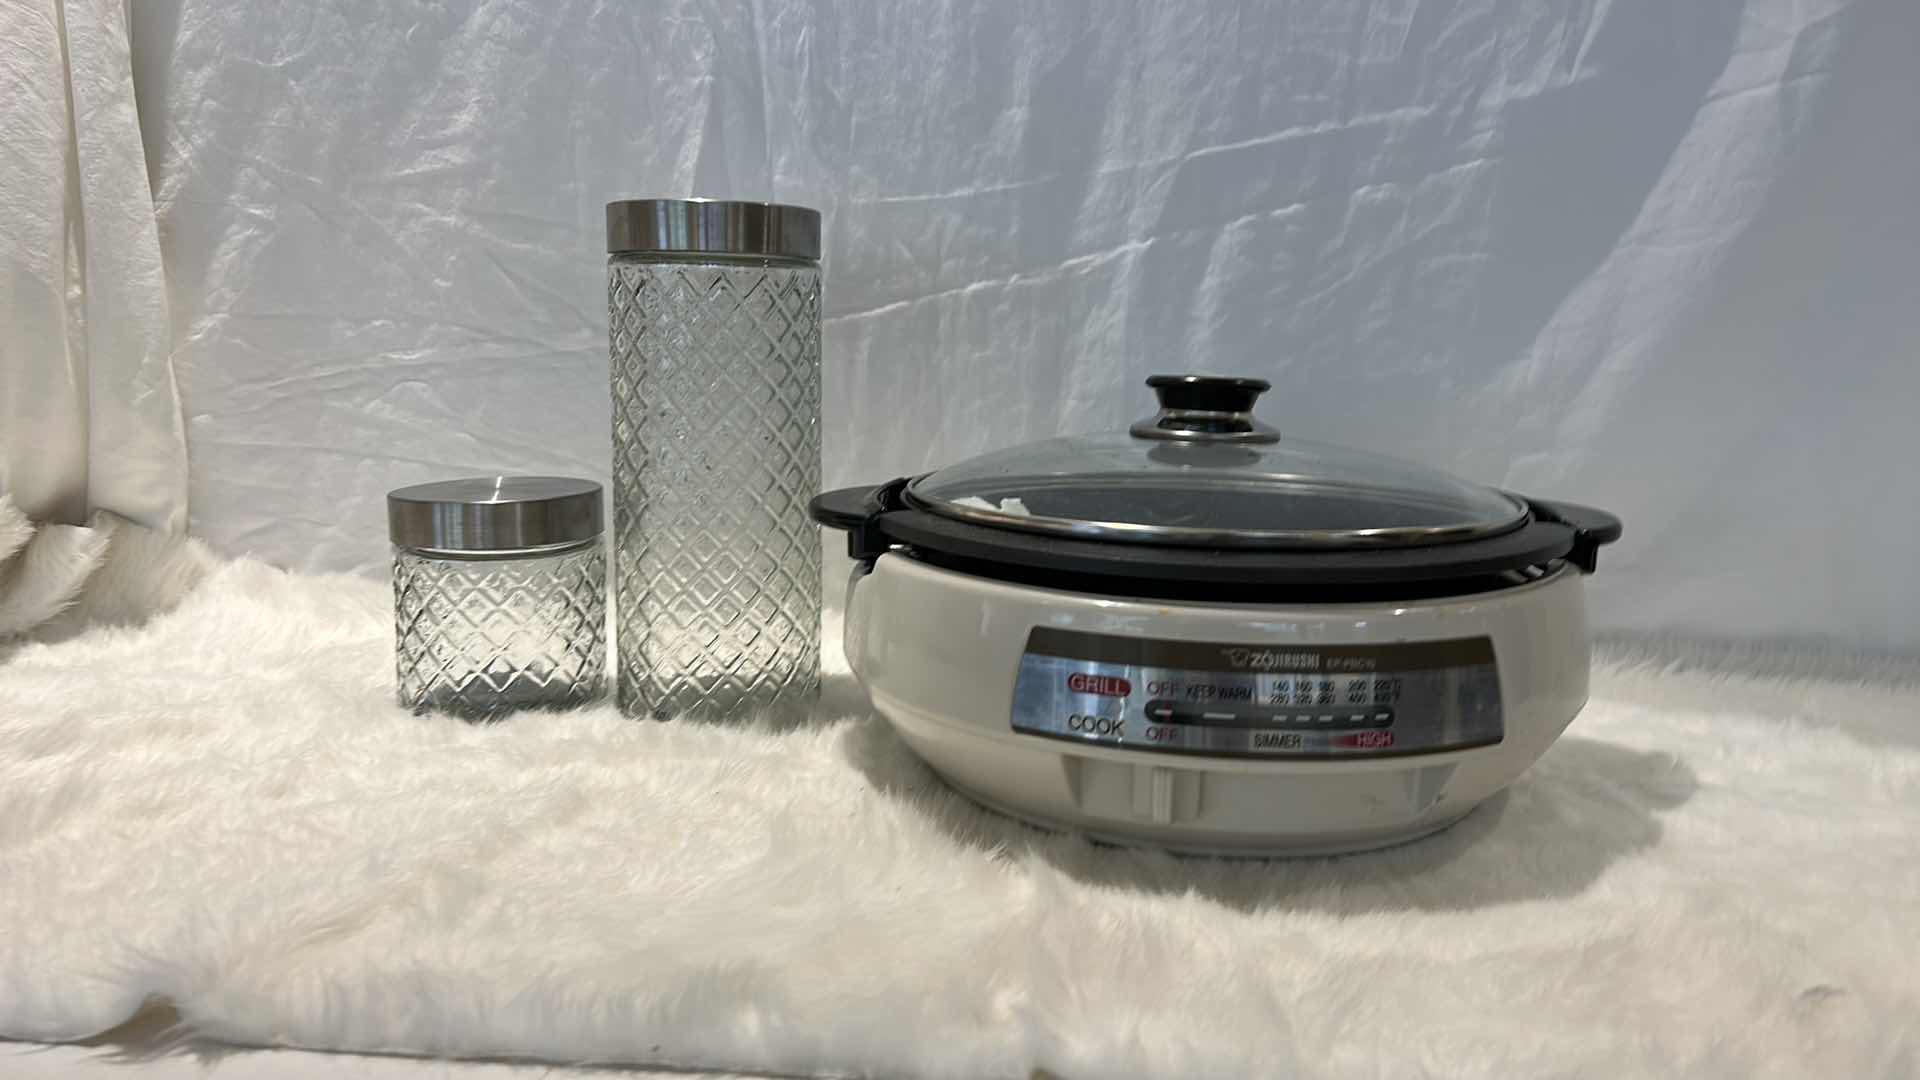 Photo 6 of KITCHEN ACCESSORIES - 2 GLASS CANISTERS AND ZOJIRUSHI GRILL